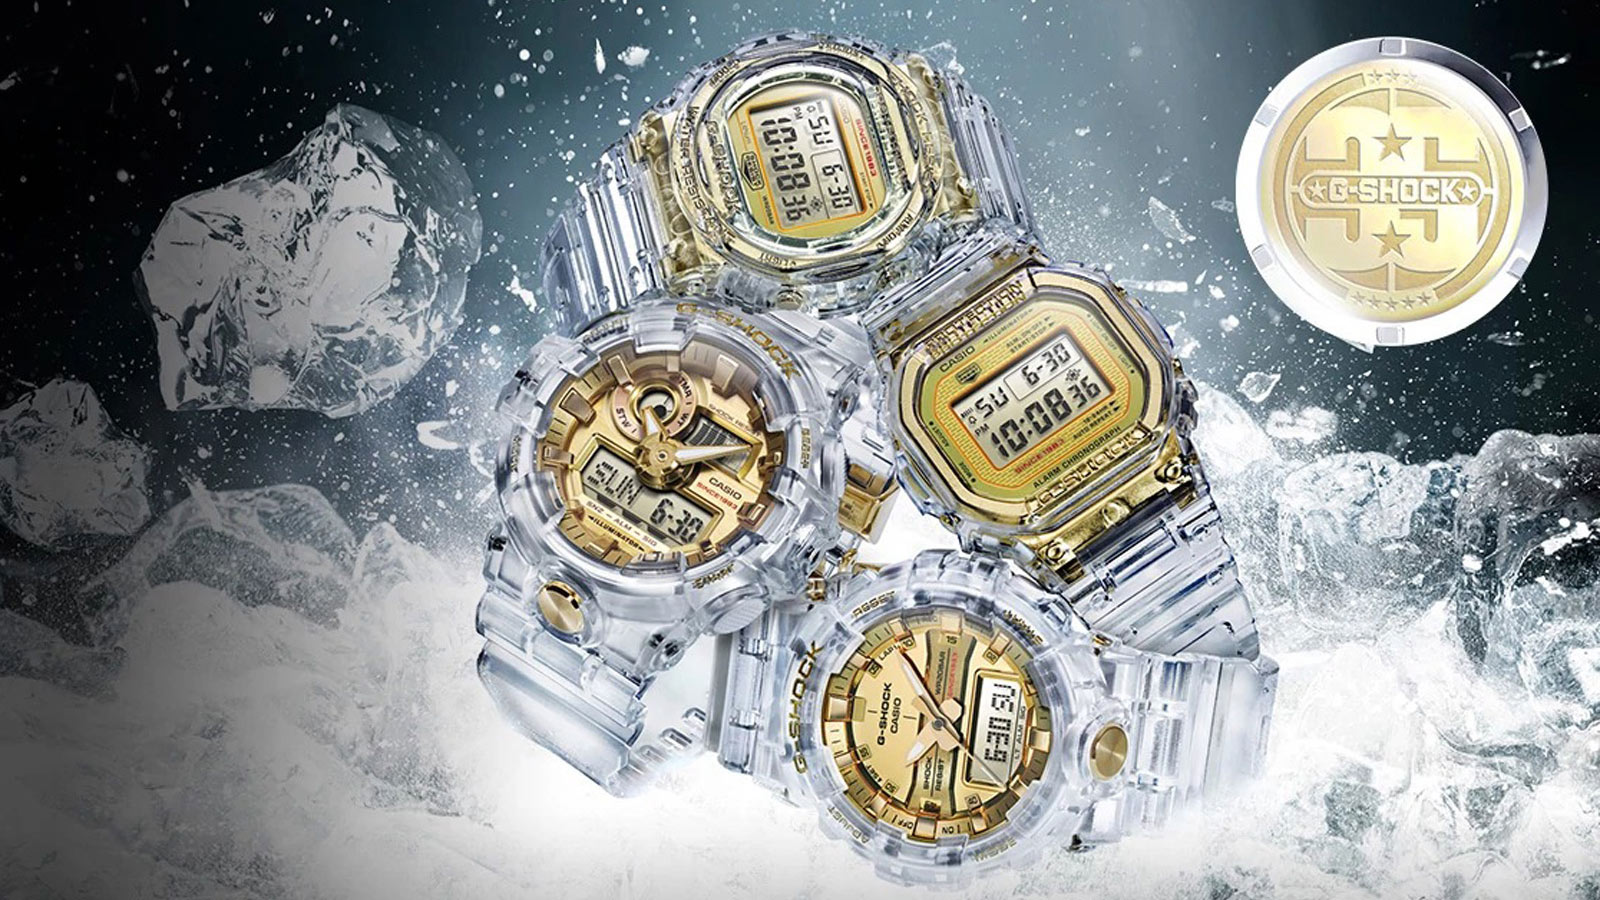 Casio G-Shock Glacier Gold 35th Anniversary Limited Edition ‘Jelly G’ Collection Watches